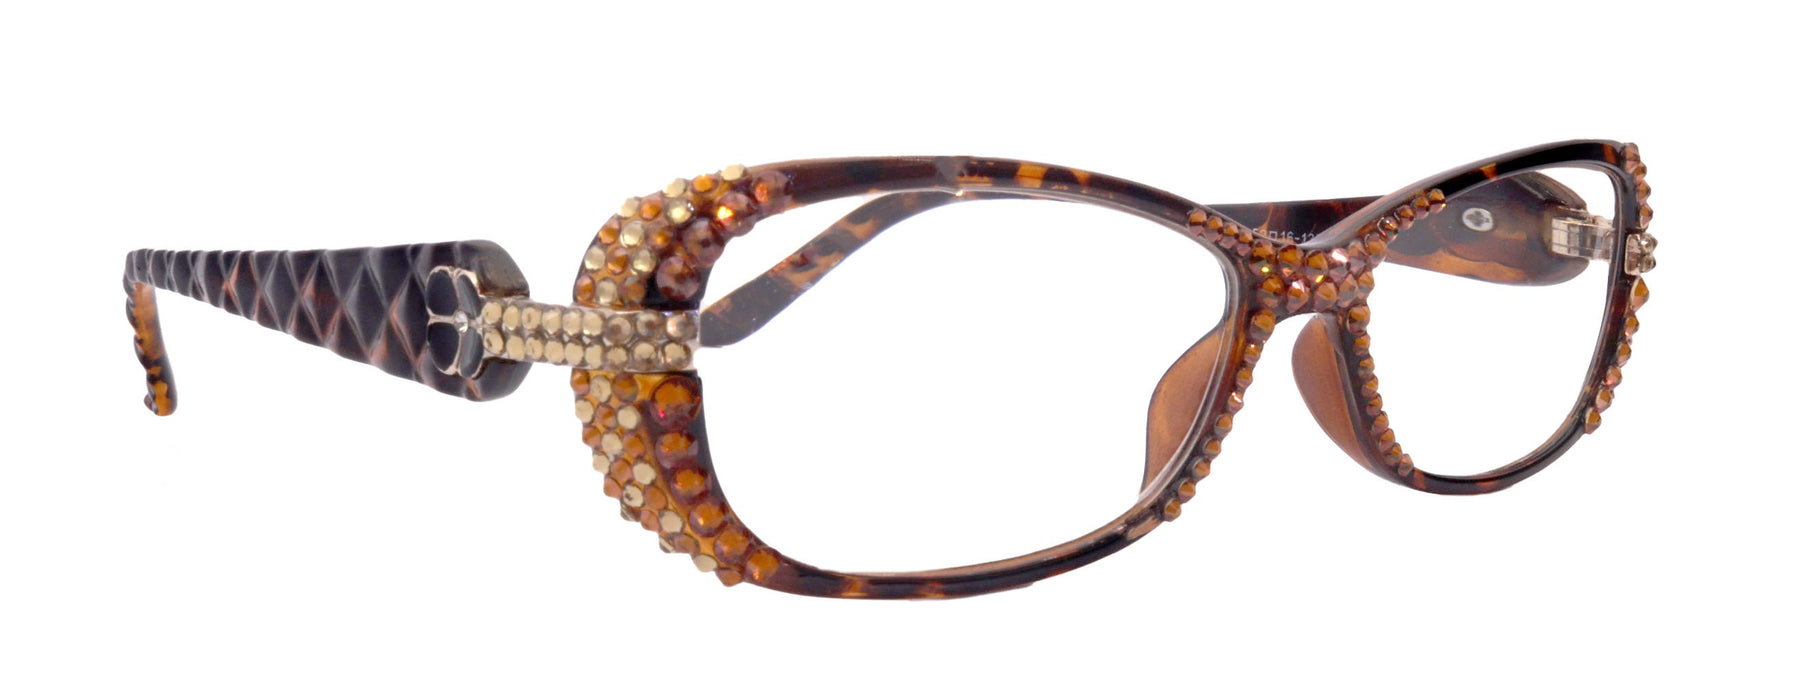 Glamour Quilted, (Bling) Women Reading Glasses W (Front, Sides) (Light Colorado, copper ) Genuine European Crystals NY Fifth Avenue